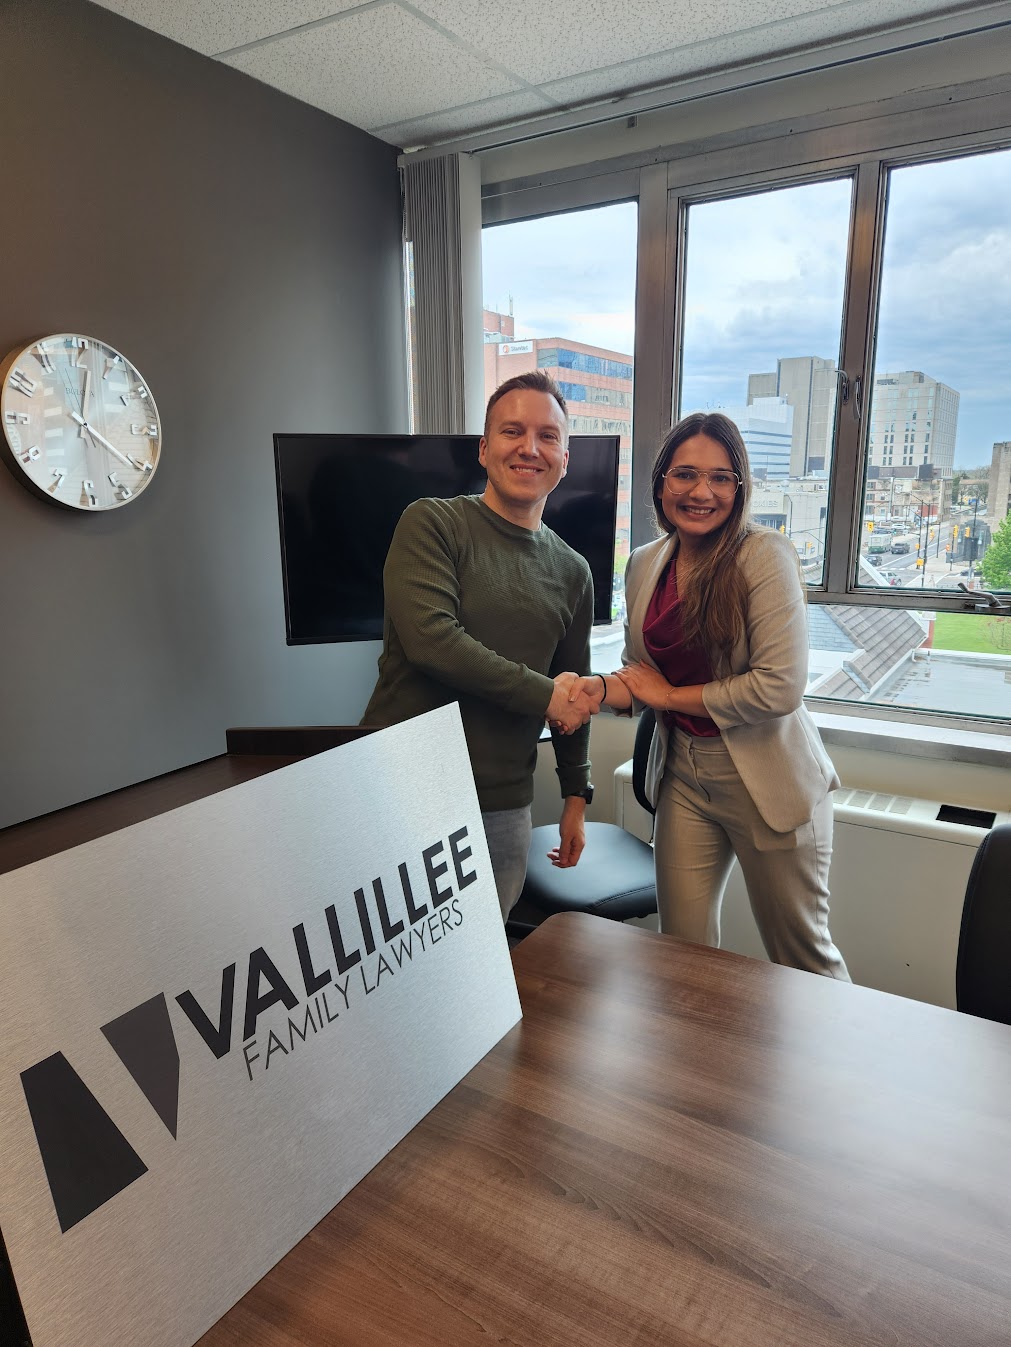 Fiza Sharma and Eric Vallillee shaking hands at Vallillee Family Lawyers in London, Ontario on her last day of articles.